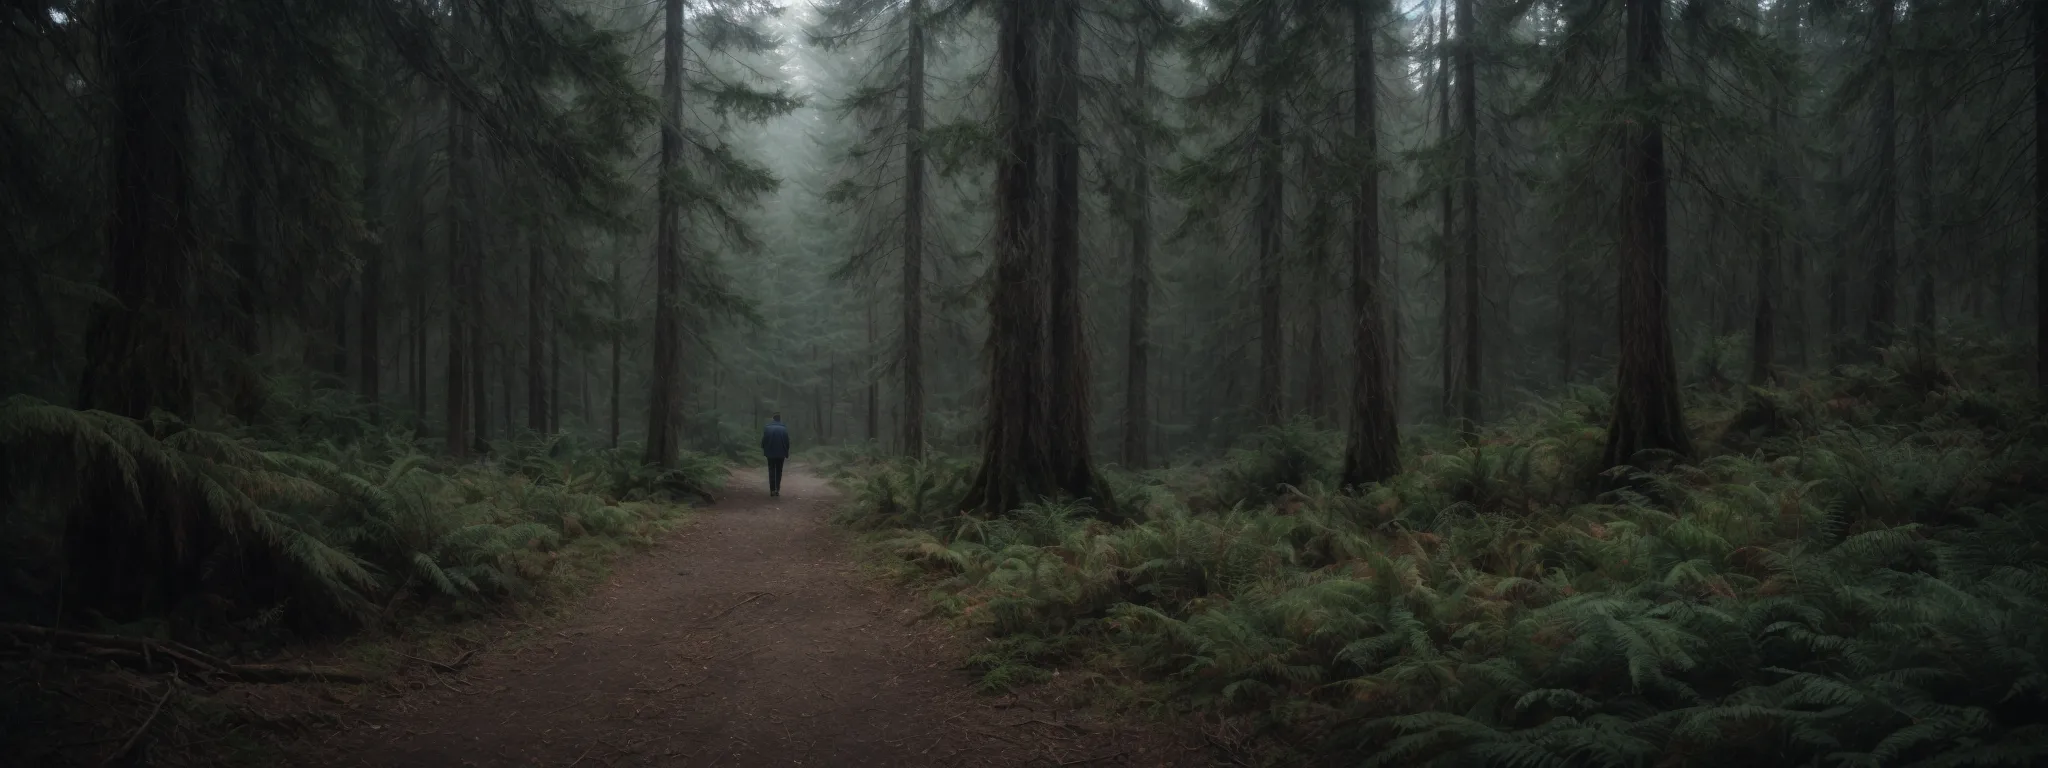 a solitary figure standing at the crossroads of a dense forest, gazing down a narrow, less-trodden path.